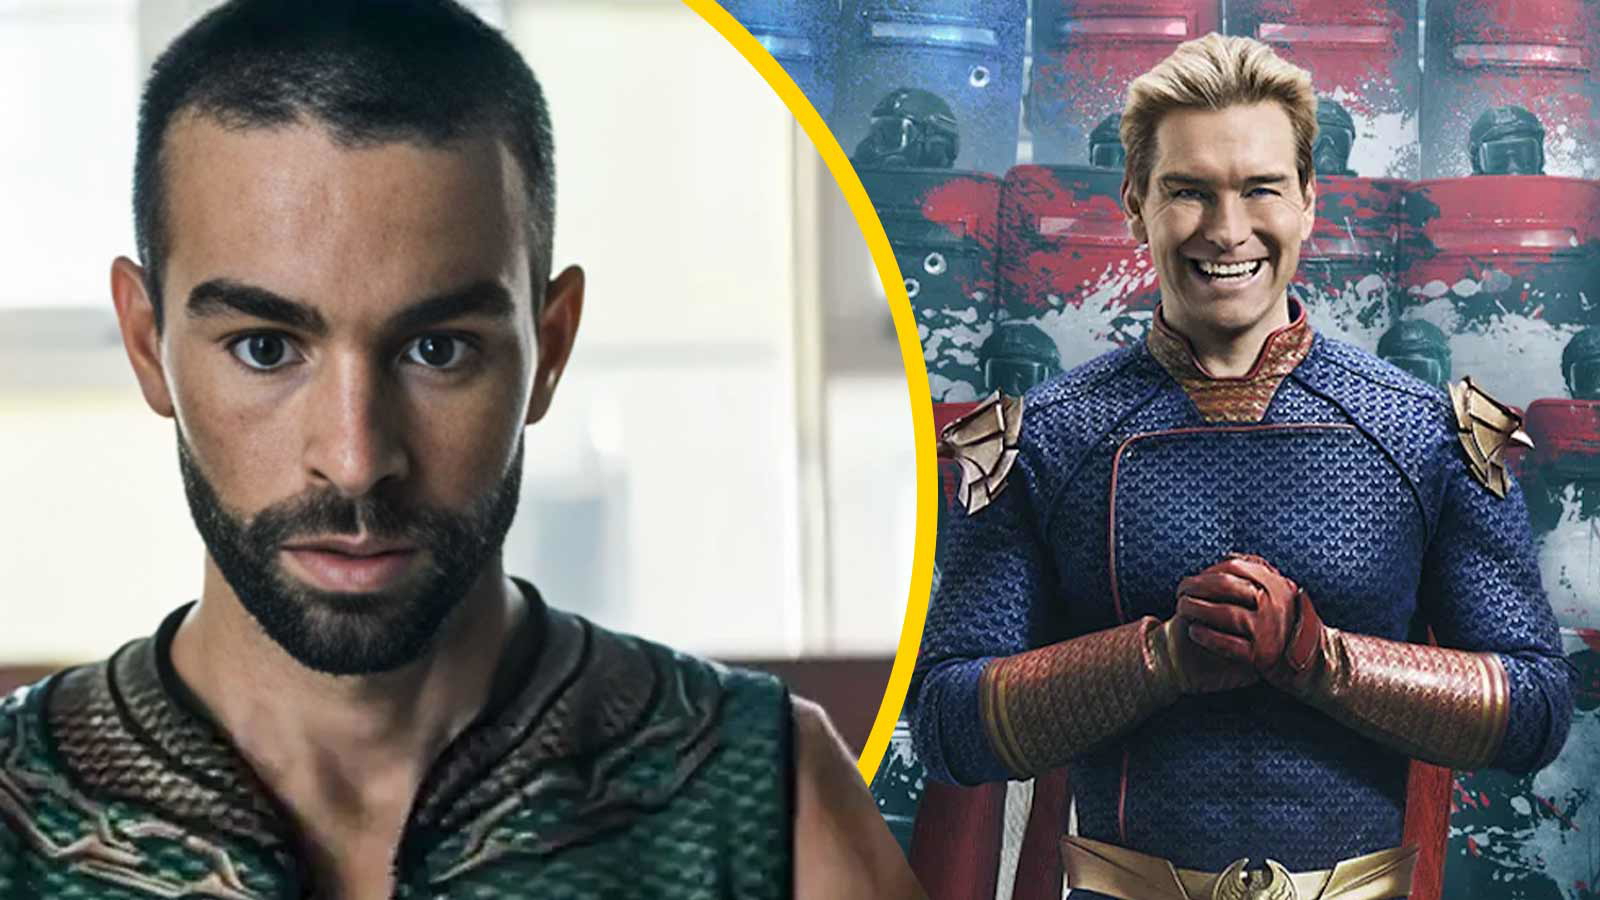 “He just gets jumped by all…”: Darkest Theory About The Deep in ‘The Boys’ Season 5 Claims a Terrible Fate Awaits Him But Not at the Hands of any Superhero